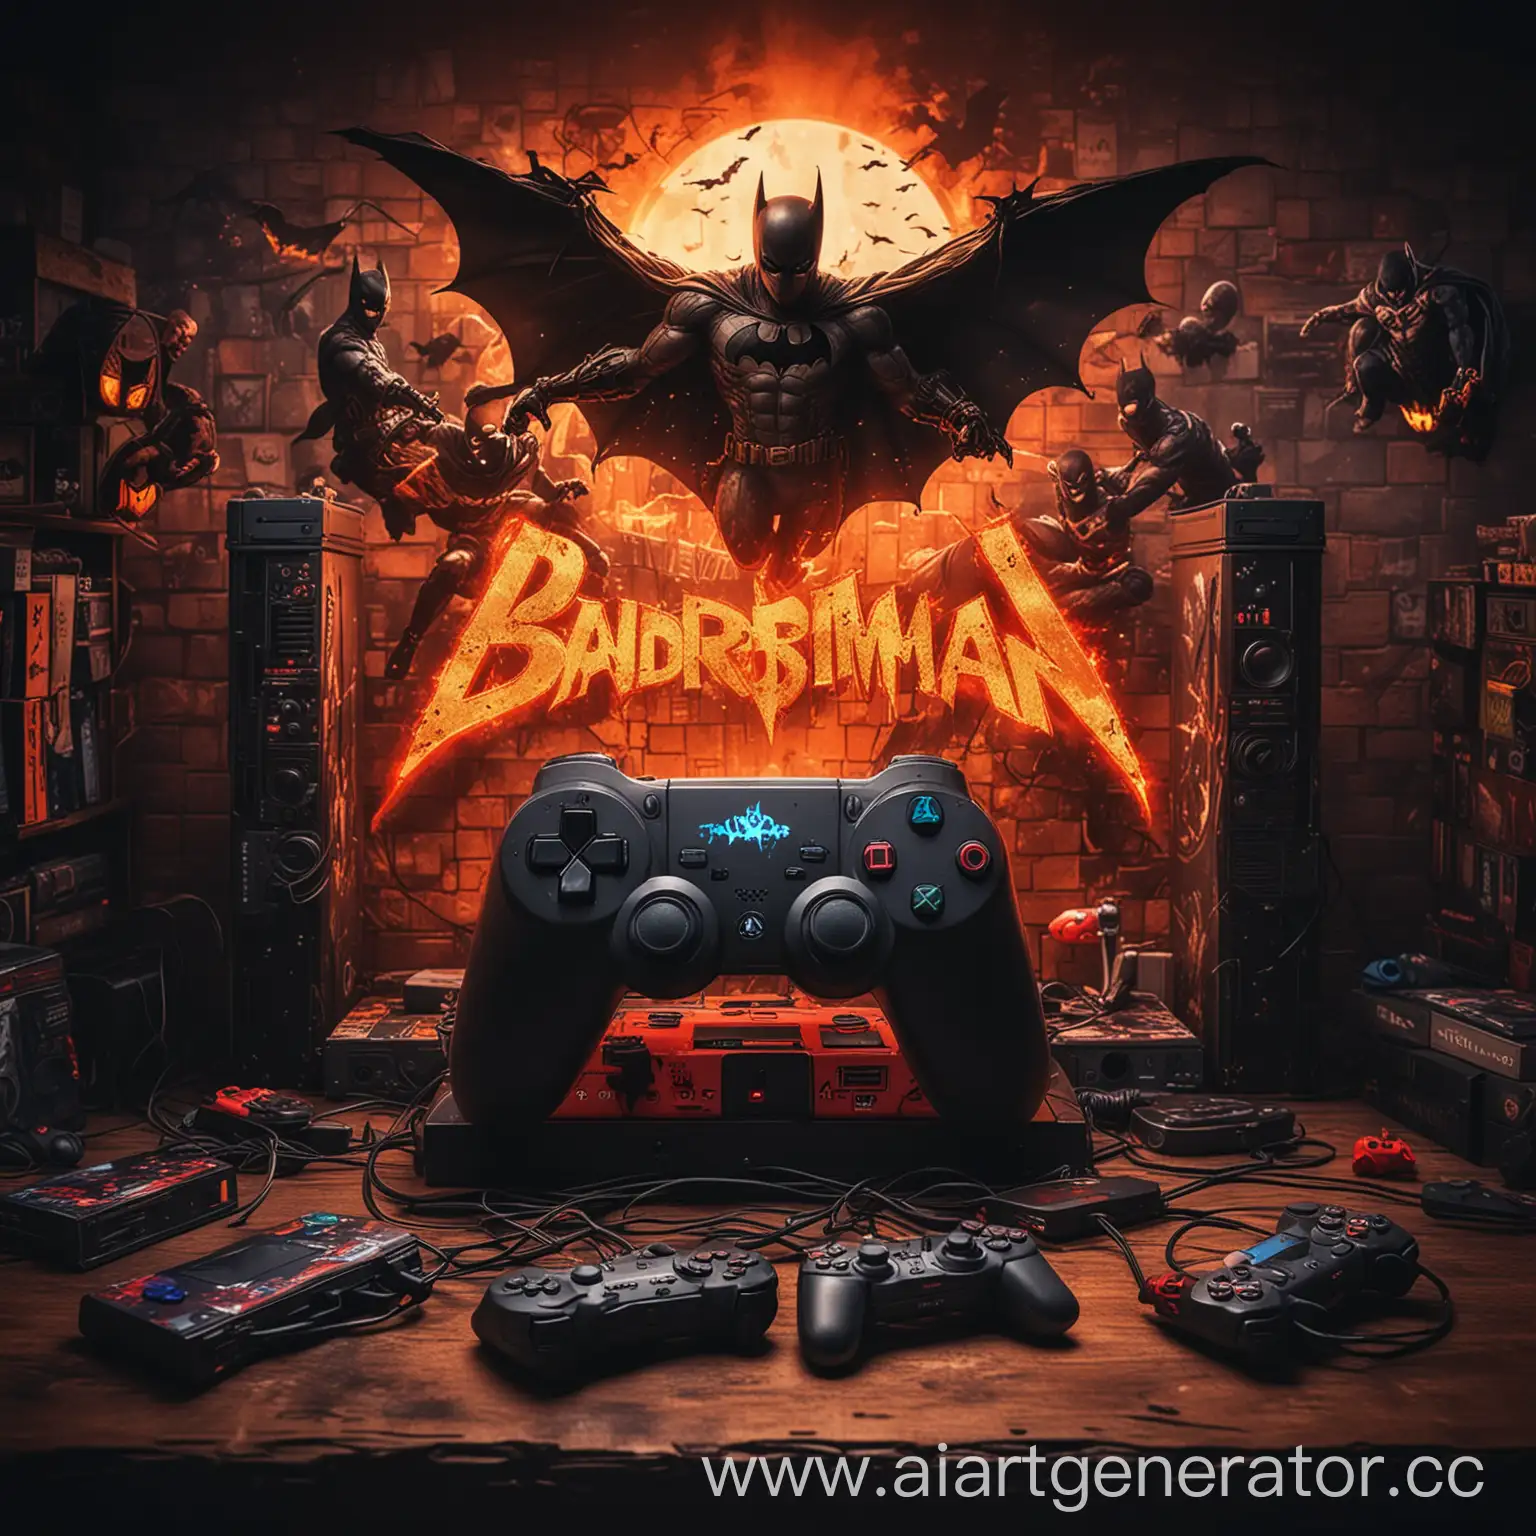 Gamers-Paradise-Retro-Consoles-Superheroes-and-Fiery-Background